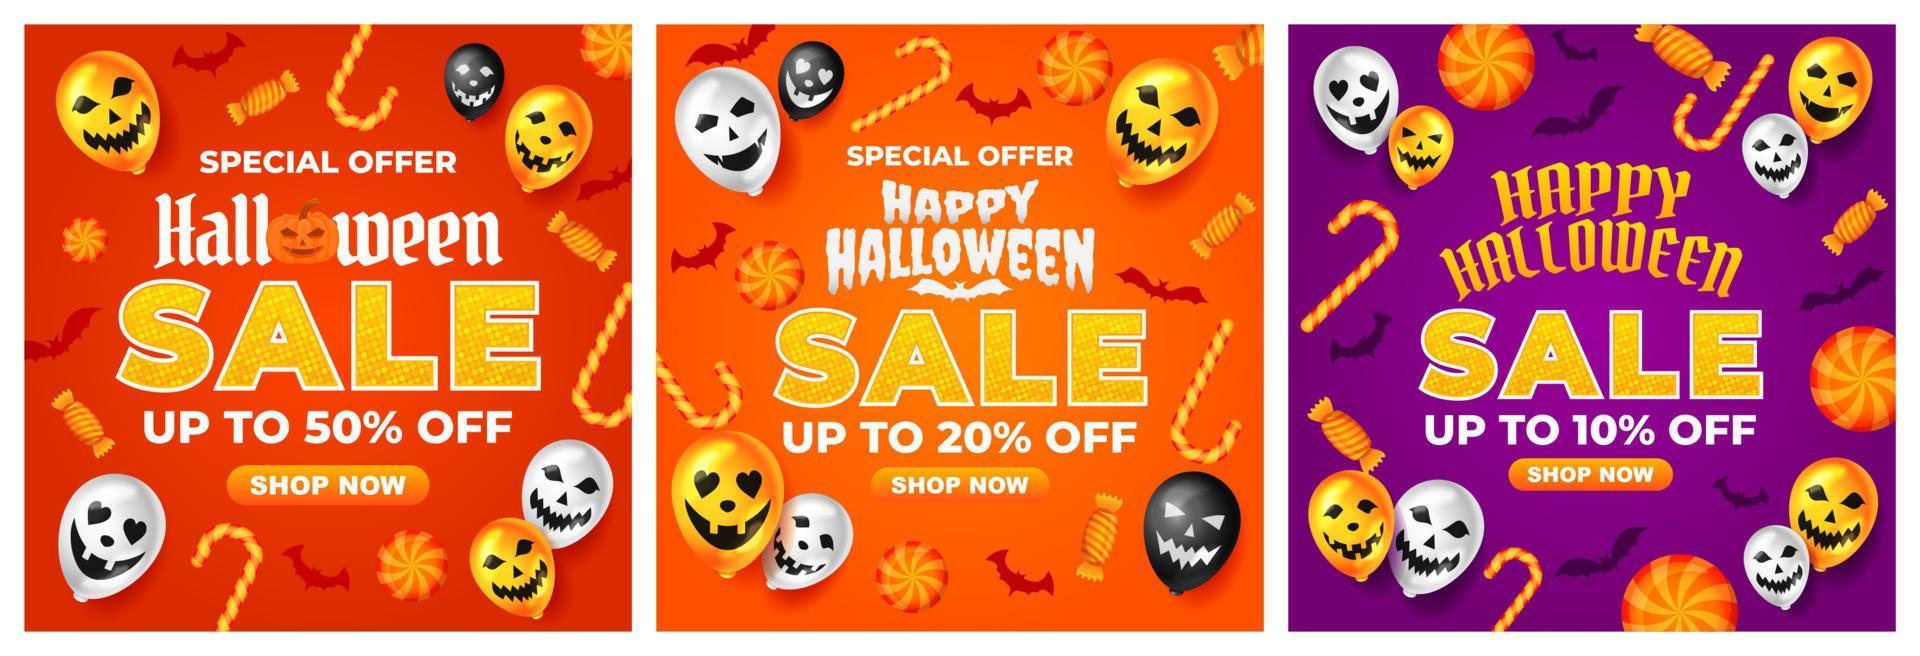 Halloween Sale Promotion  with scary balloon and candy vector, happy halloween background for business retail promotion, banner, poster, social media, feed, invitation vector